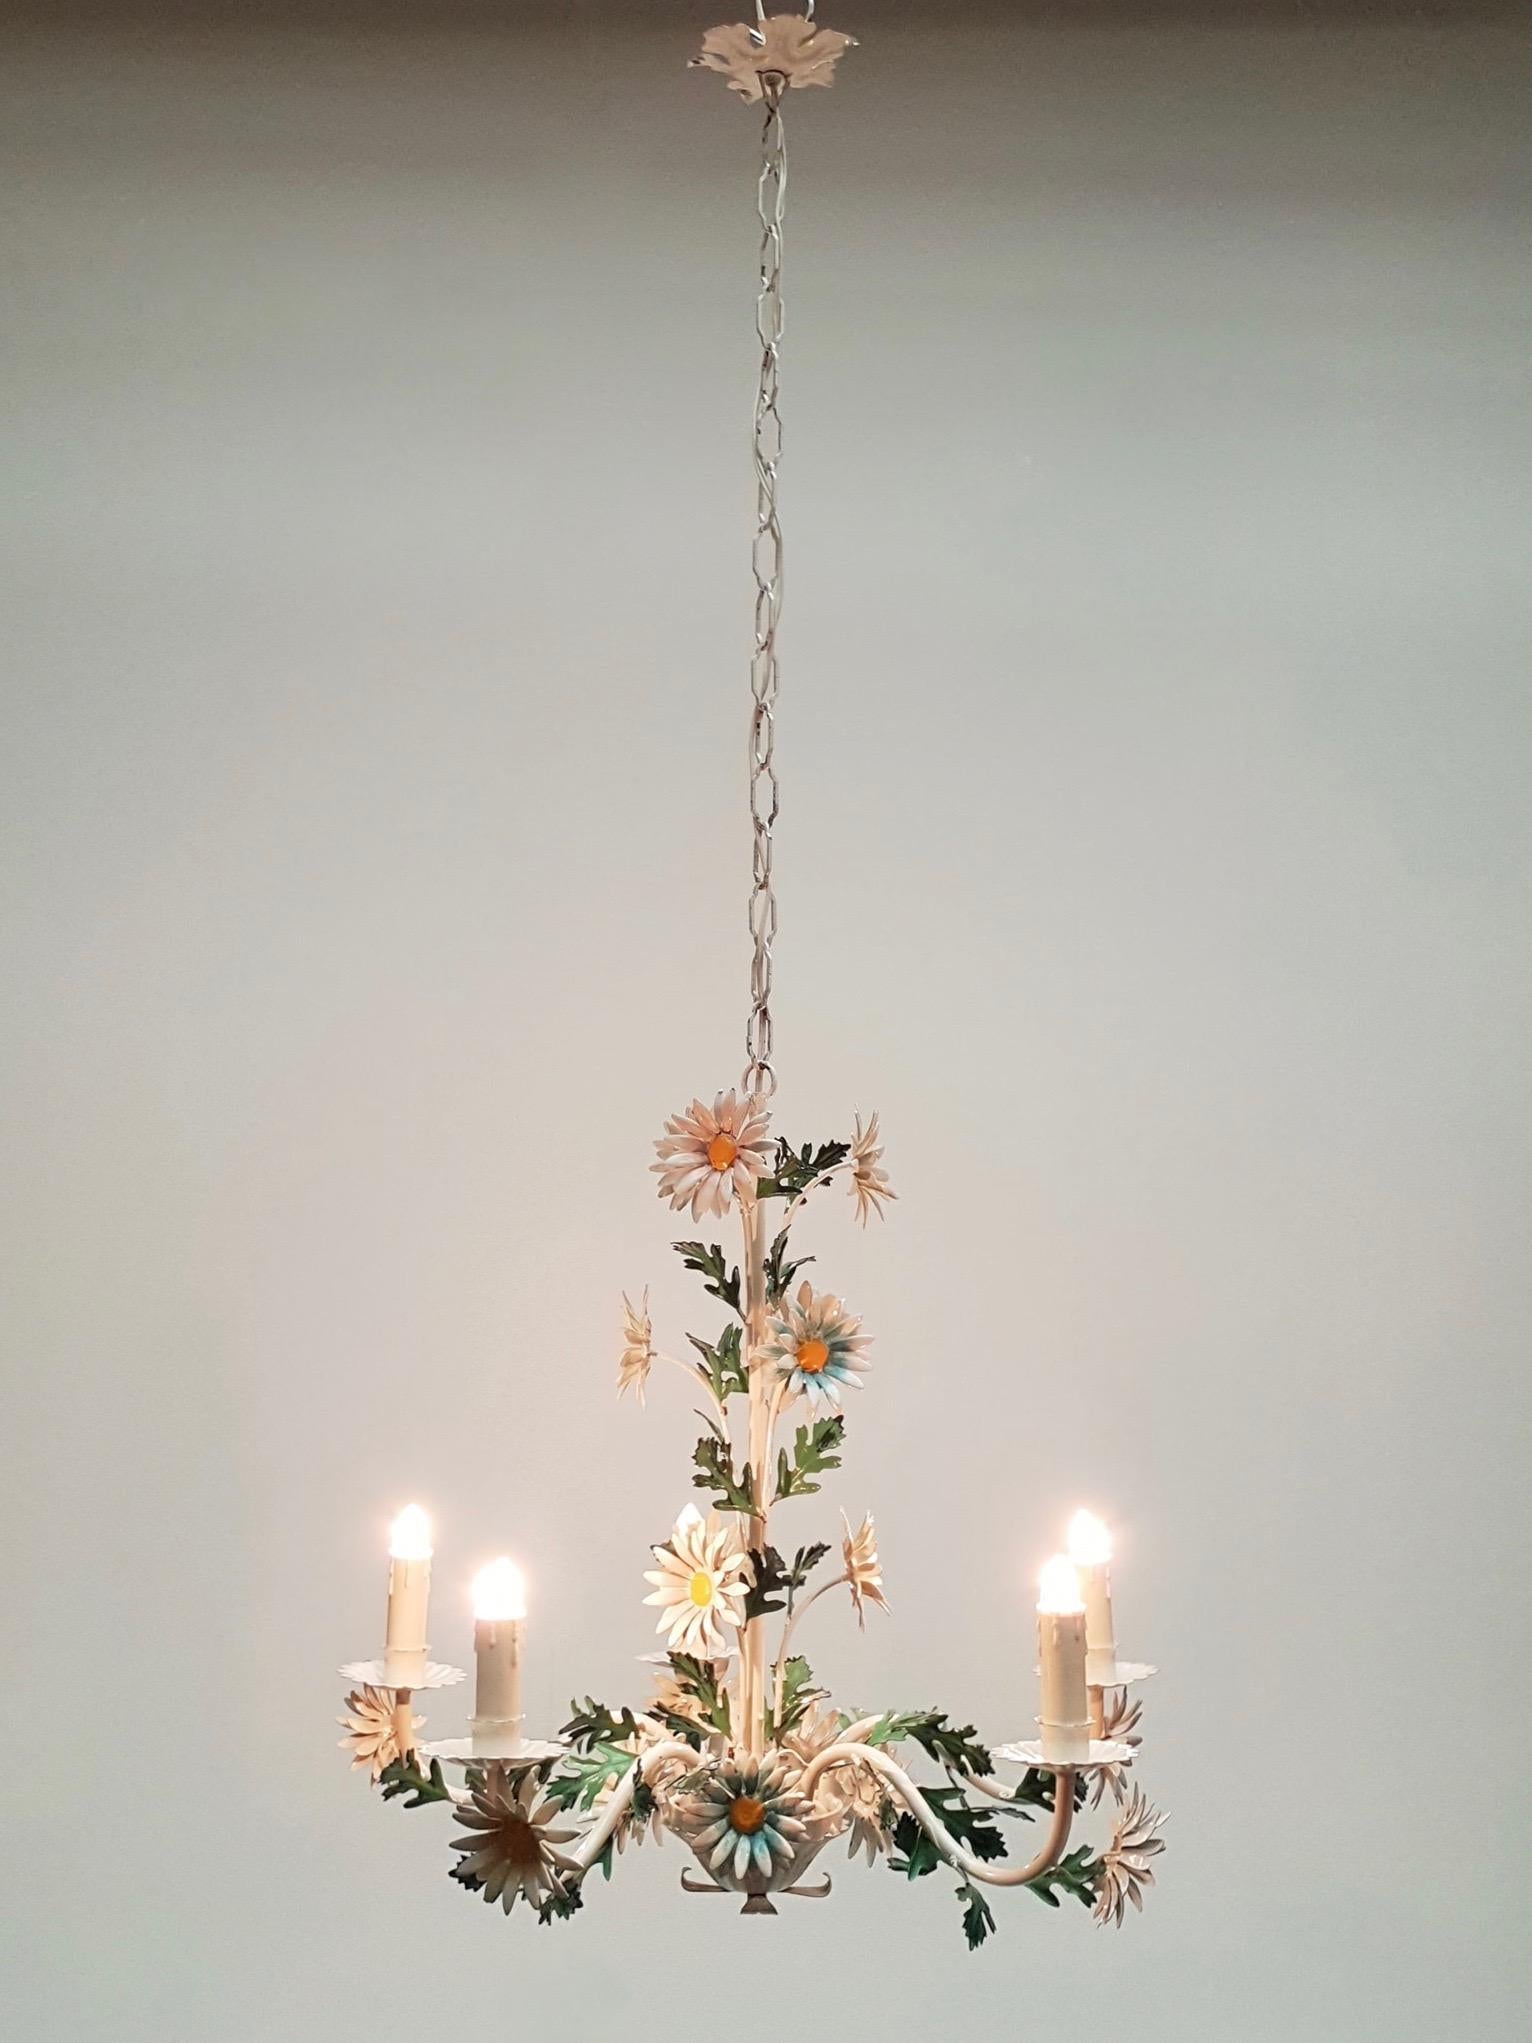 Mid-20th Century Italian Painted Iron and Tole Chandelier with Flowers (Gemalt)